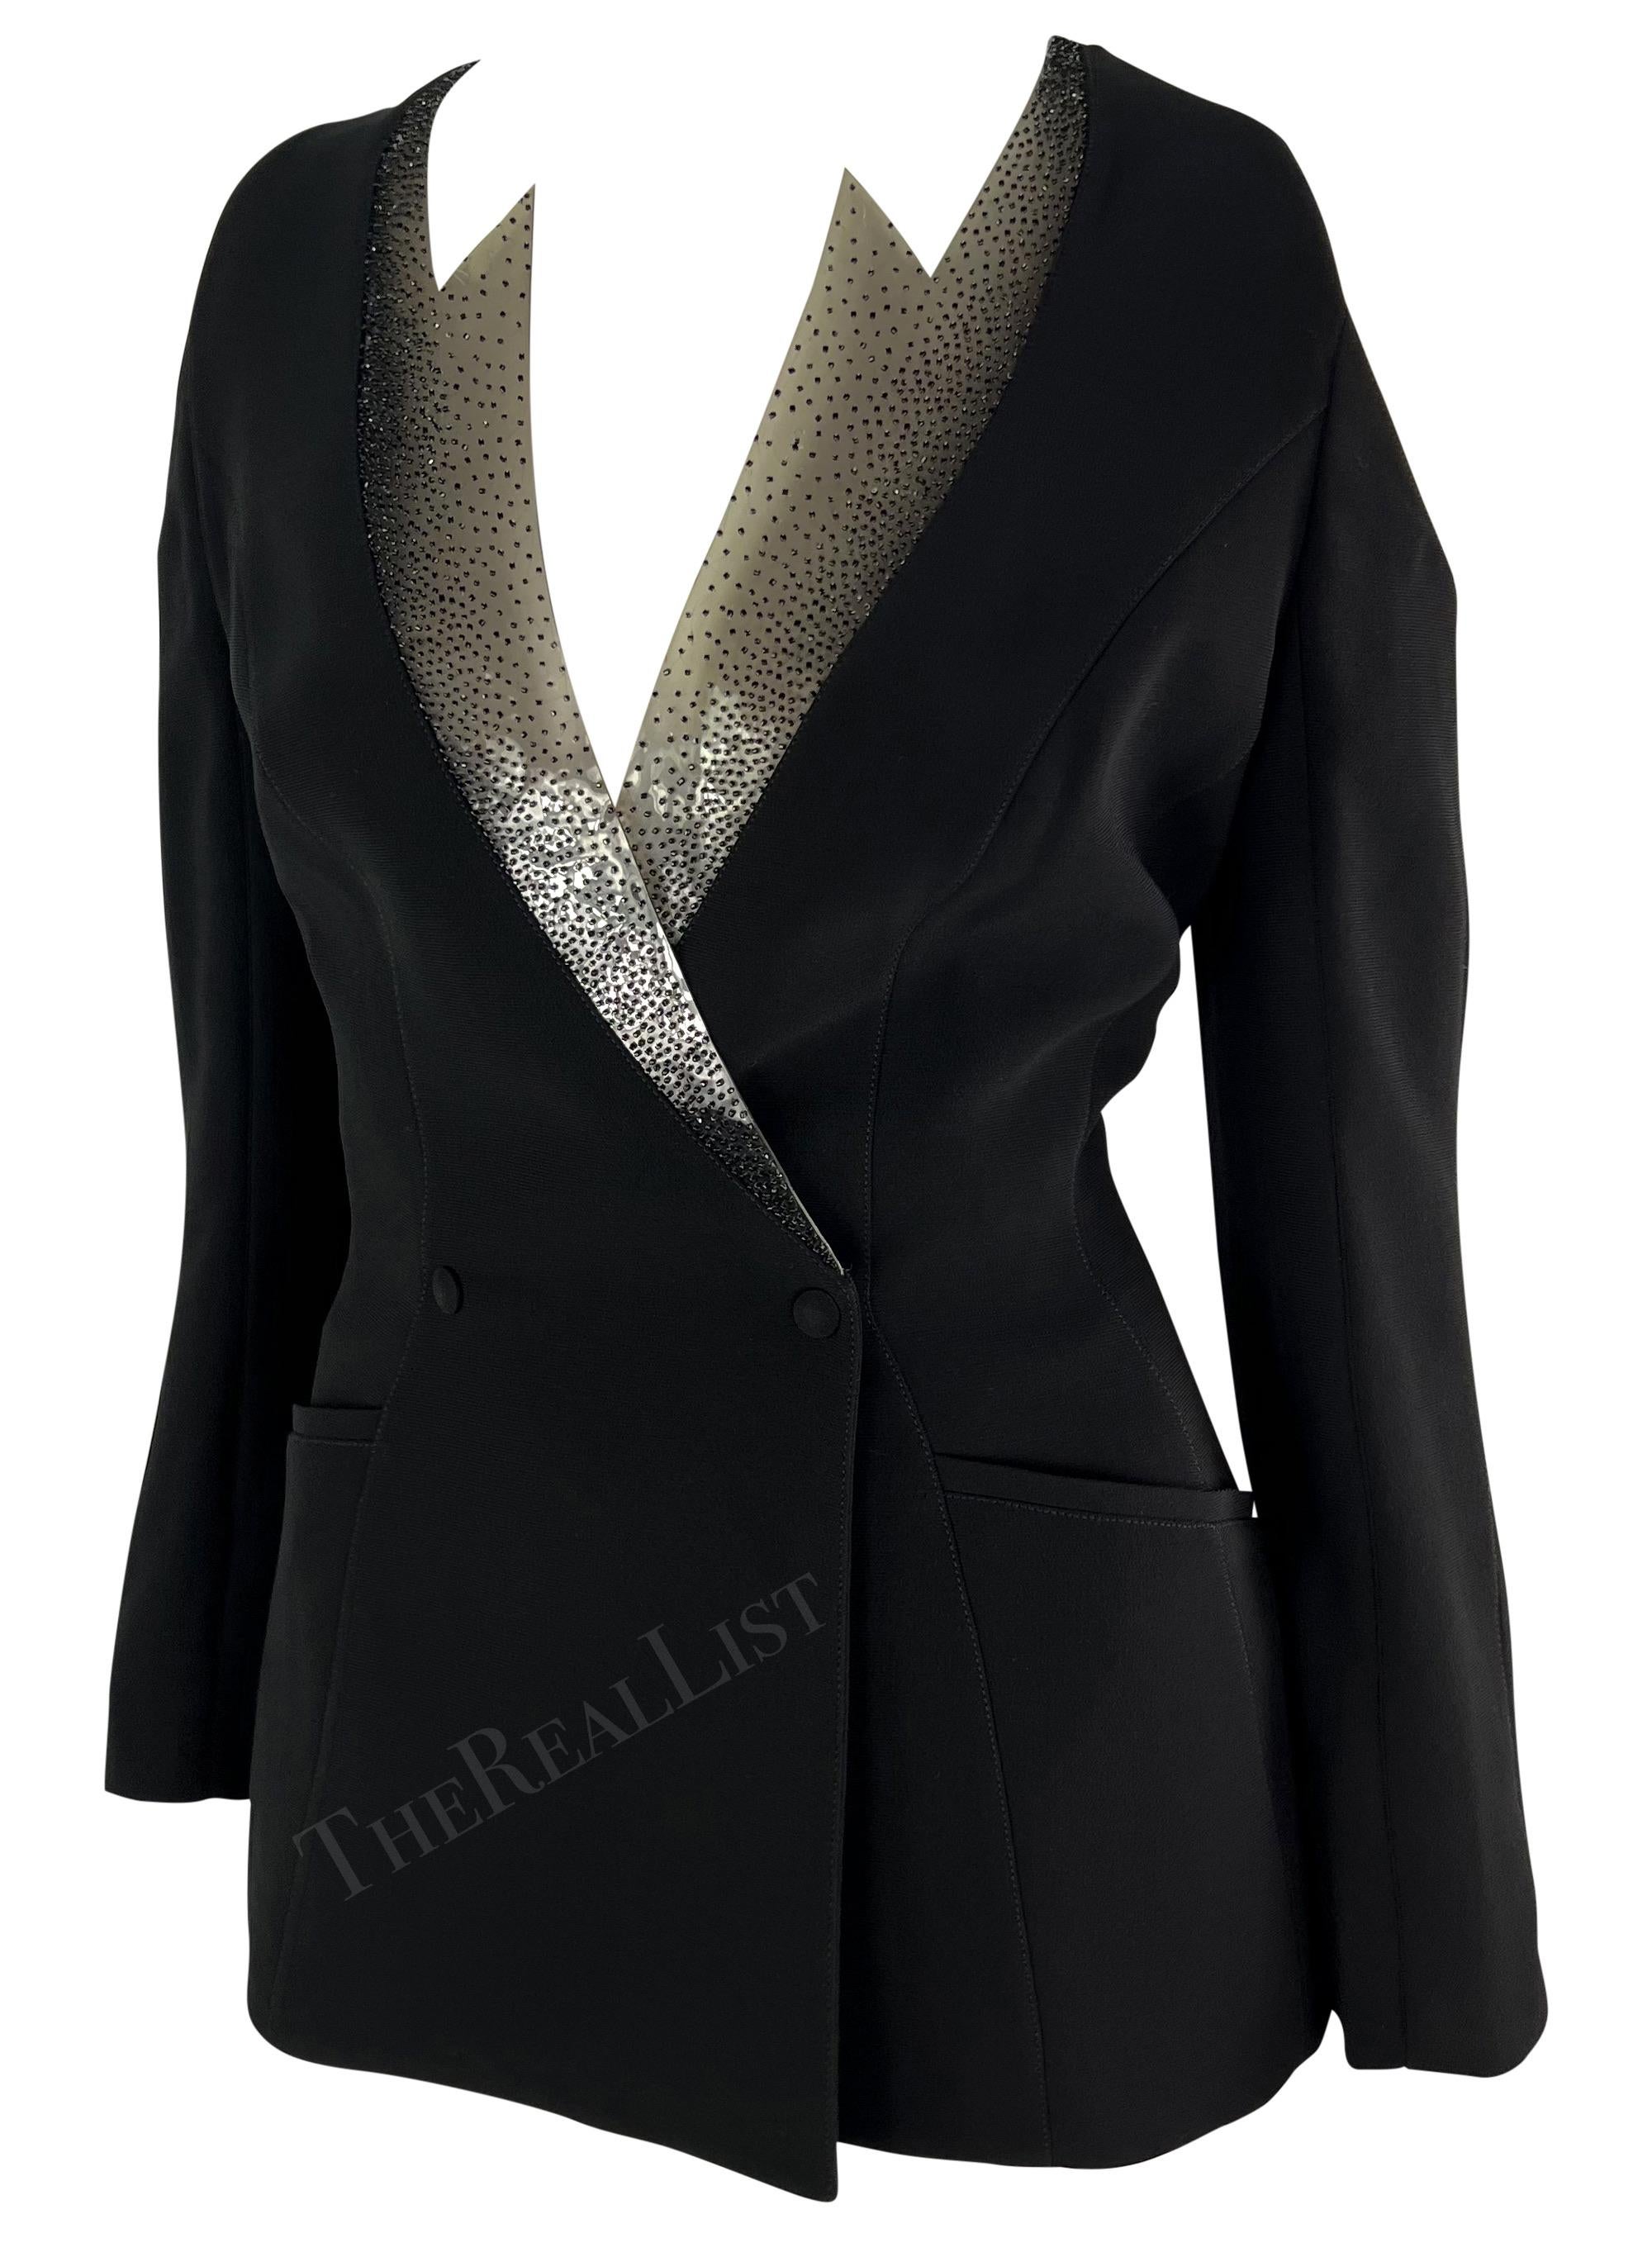 S/S 2001 Thierry Mugler Runway Beaded PVC Cutout Black Plunging Blazer For Sale 1